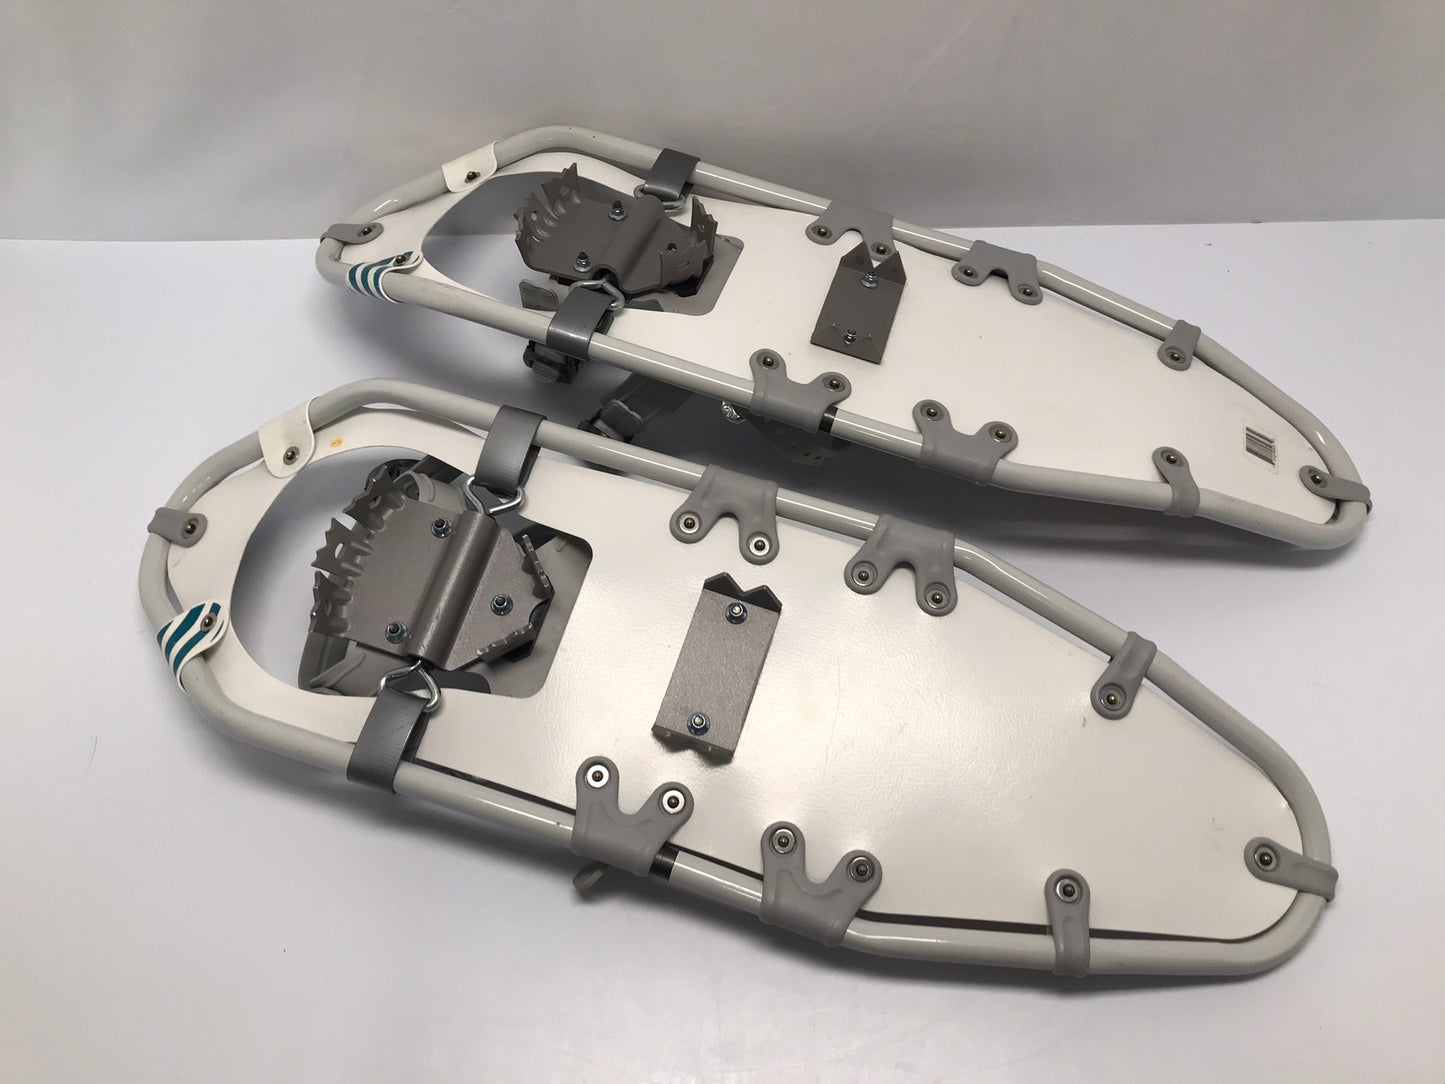 Snowshoes Adult Size 28 150-200 Lb Large GV Made In Canada New Demo Model White Grey Blue